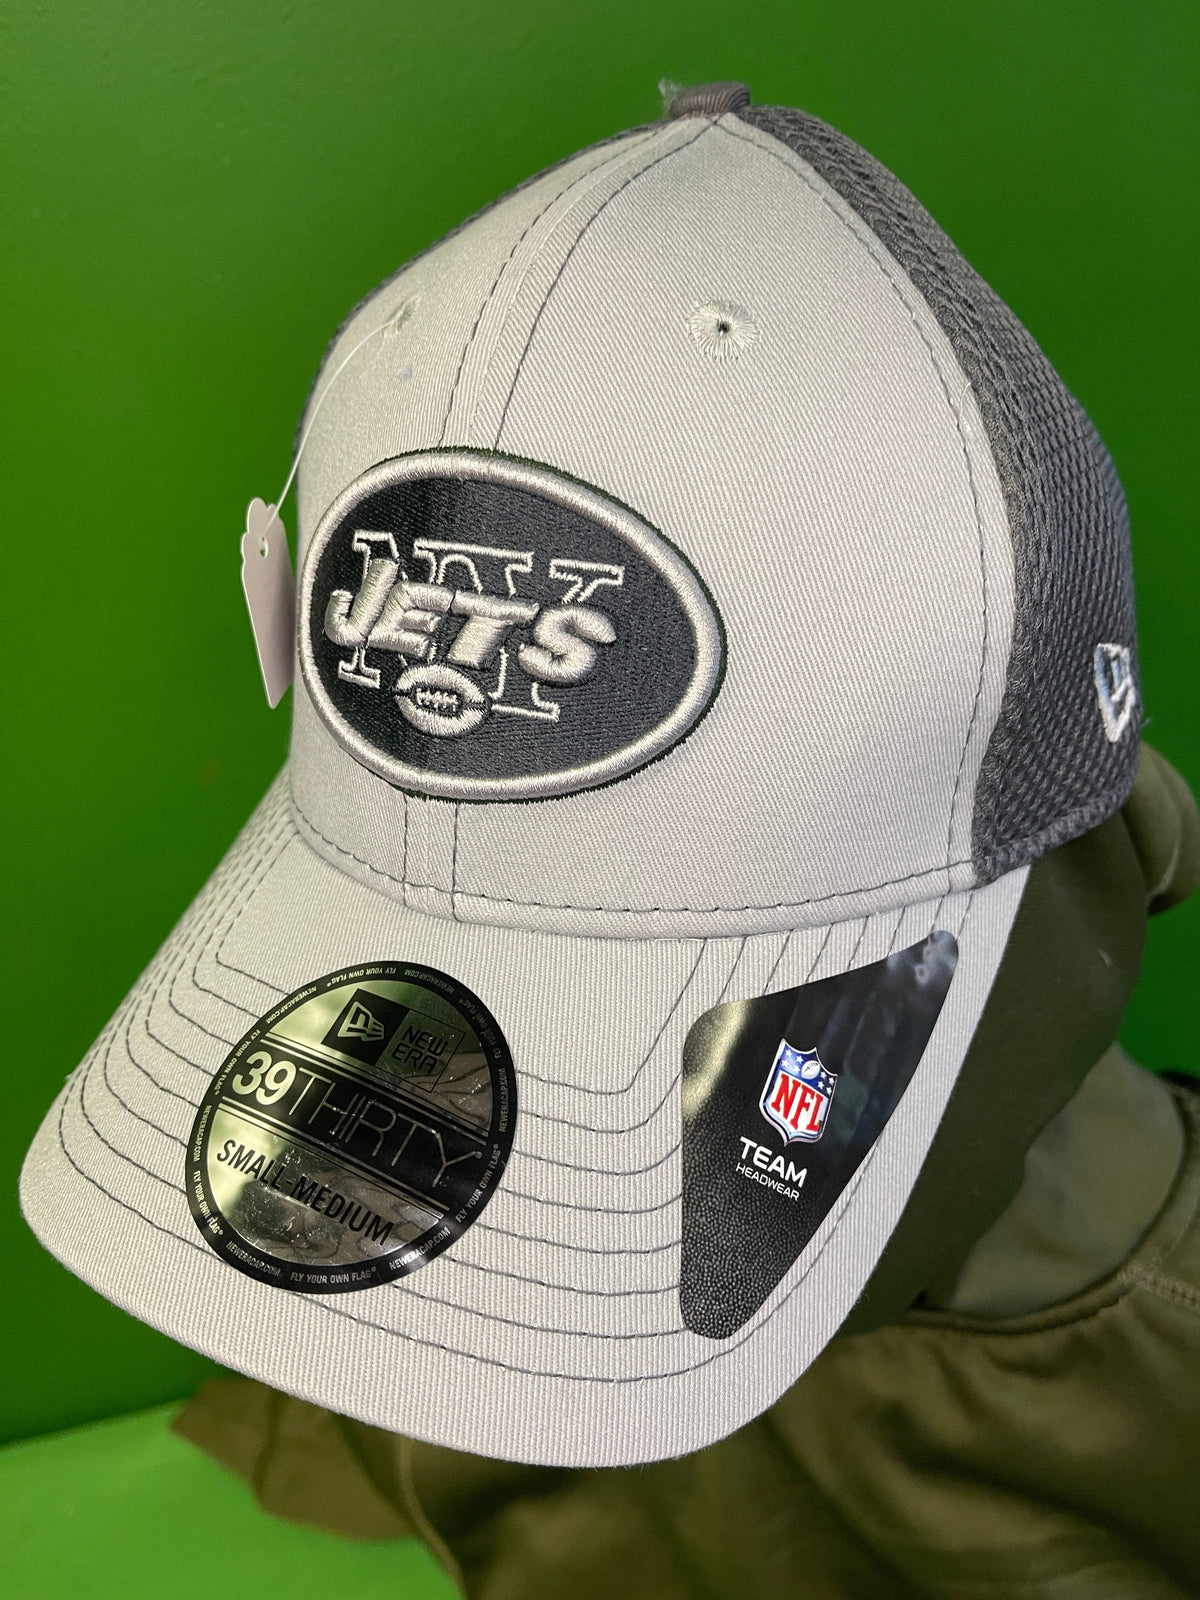 NFL New York Jets New Era 39THIRTY Greyscale Fitted Hat/Cap Small/Medium NWT